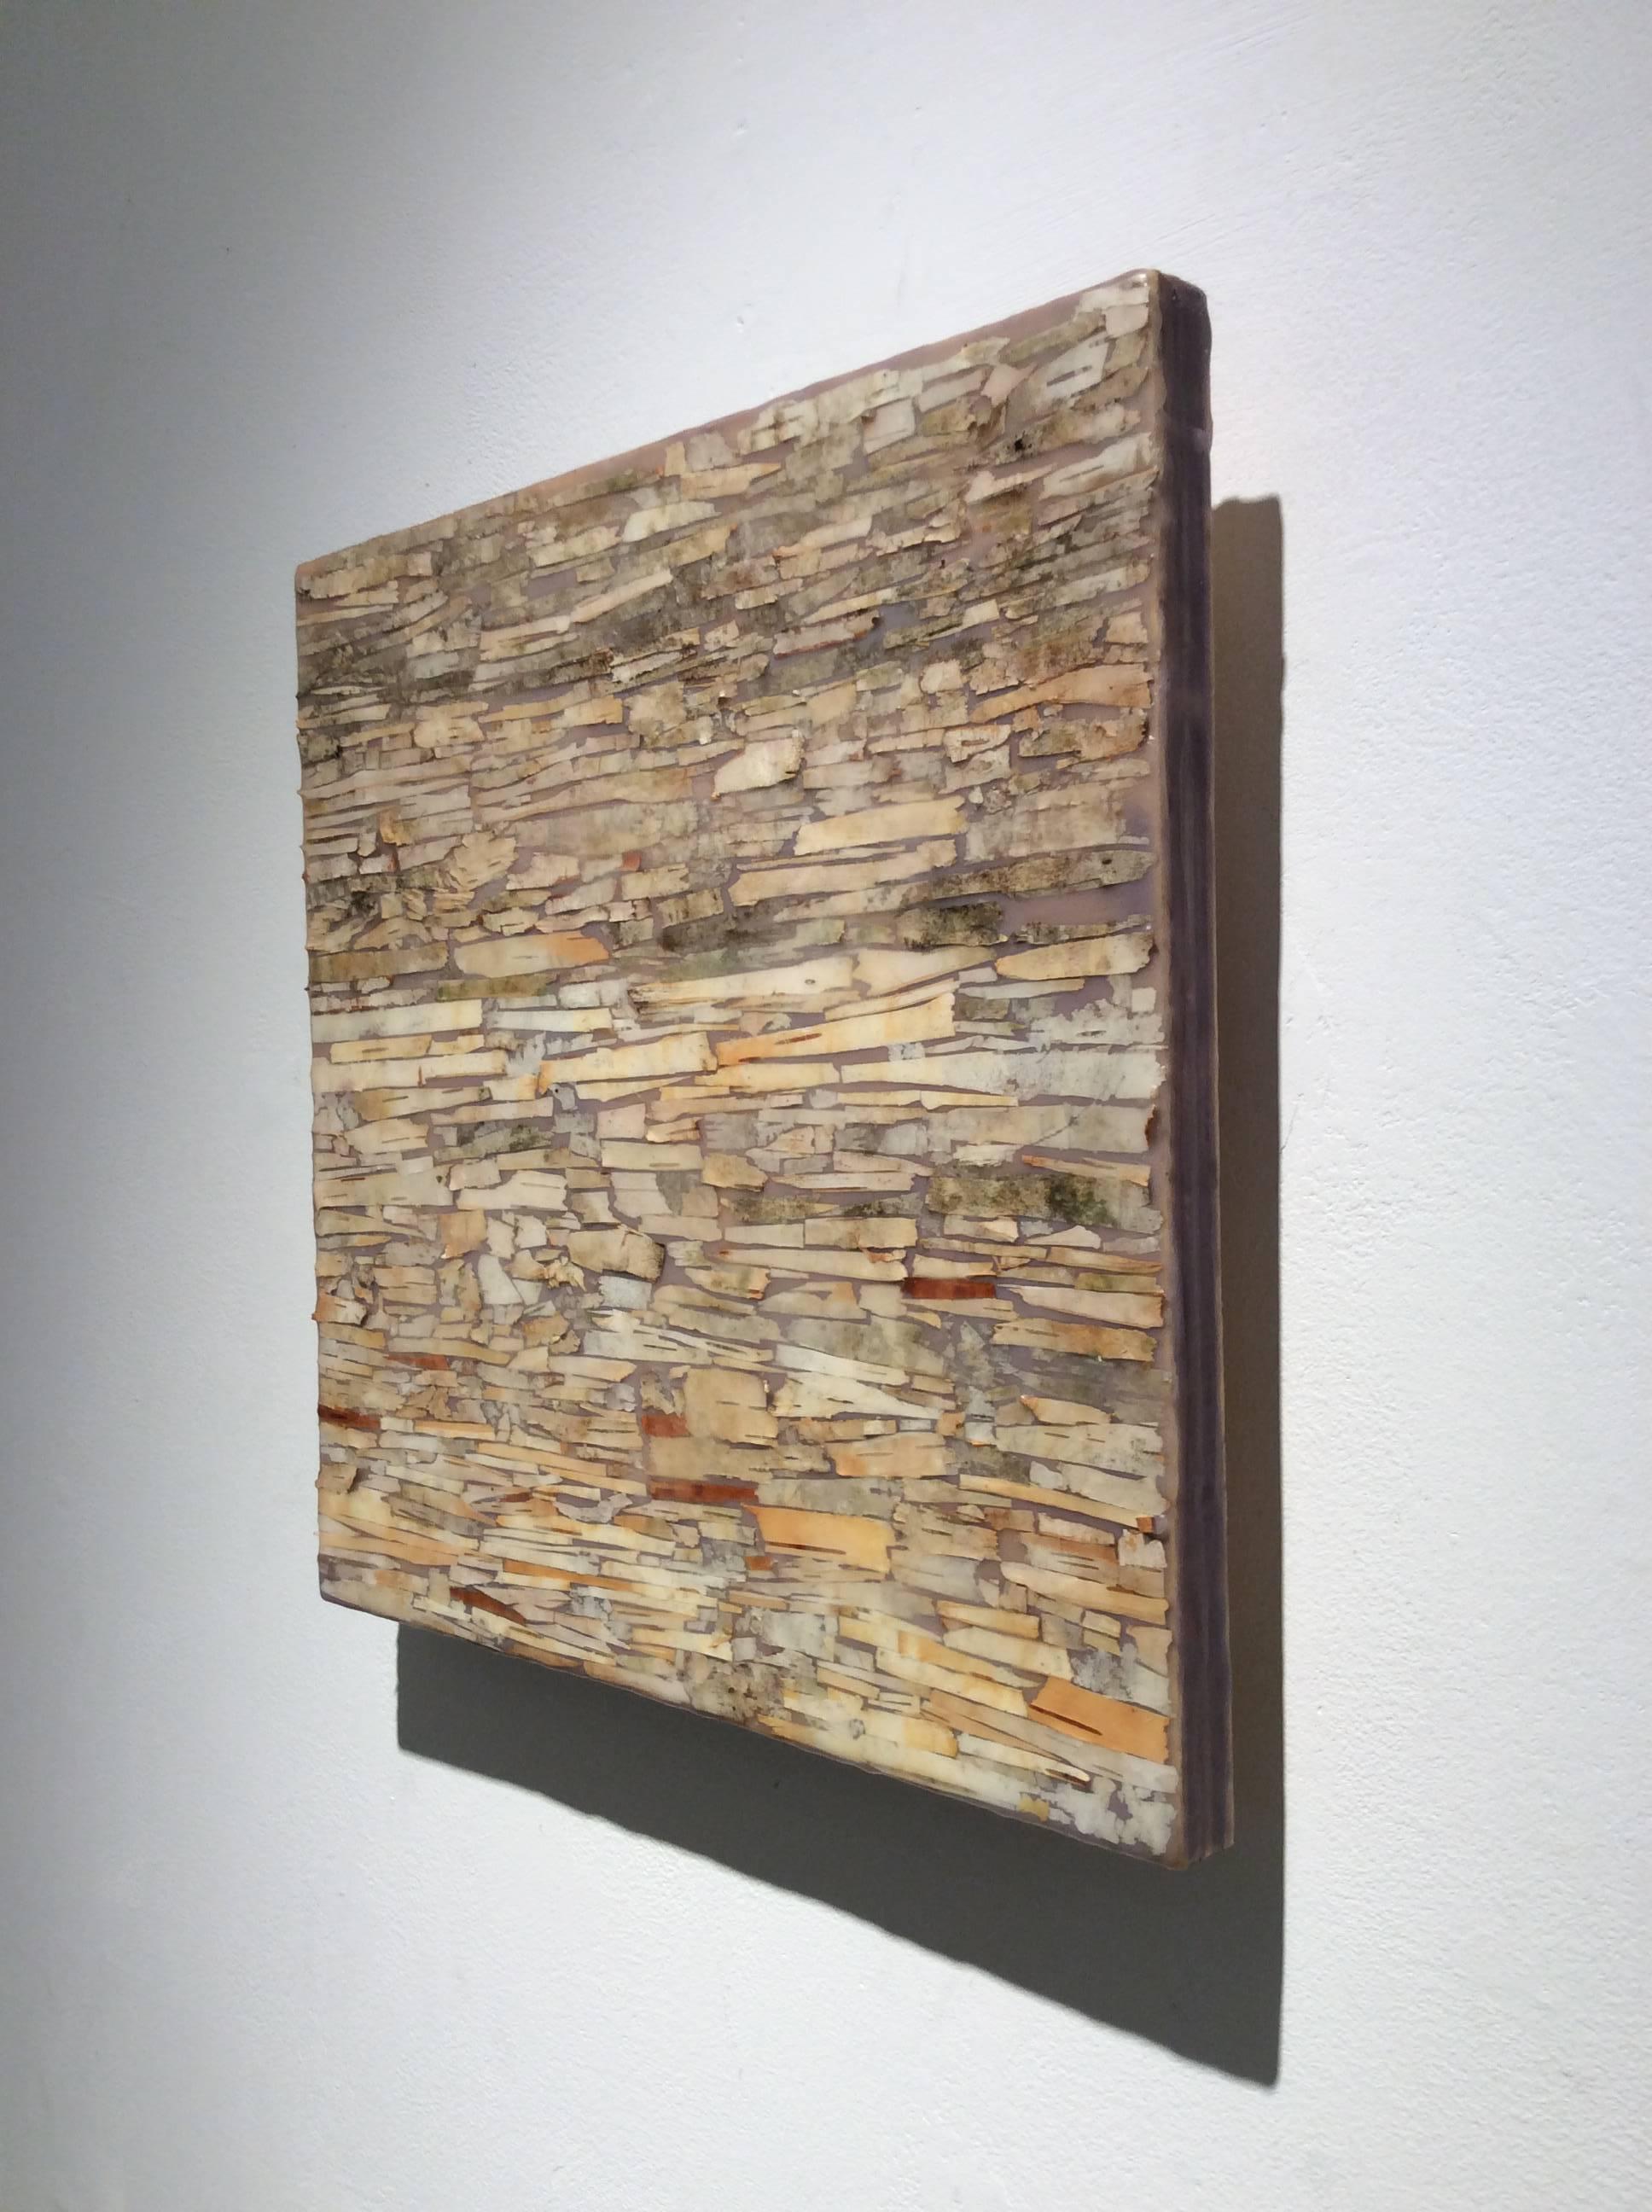 Barking Up the Wrong Tree 3 (Abstract Encaustic Painting in Neutral Palette) - Brown Abstract Sculpture by Allyson Levy